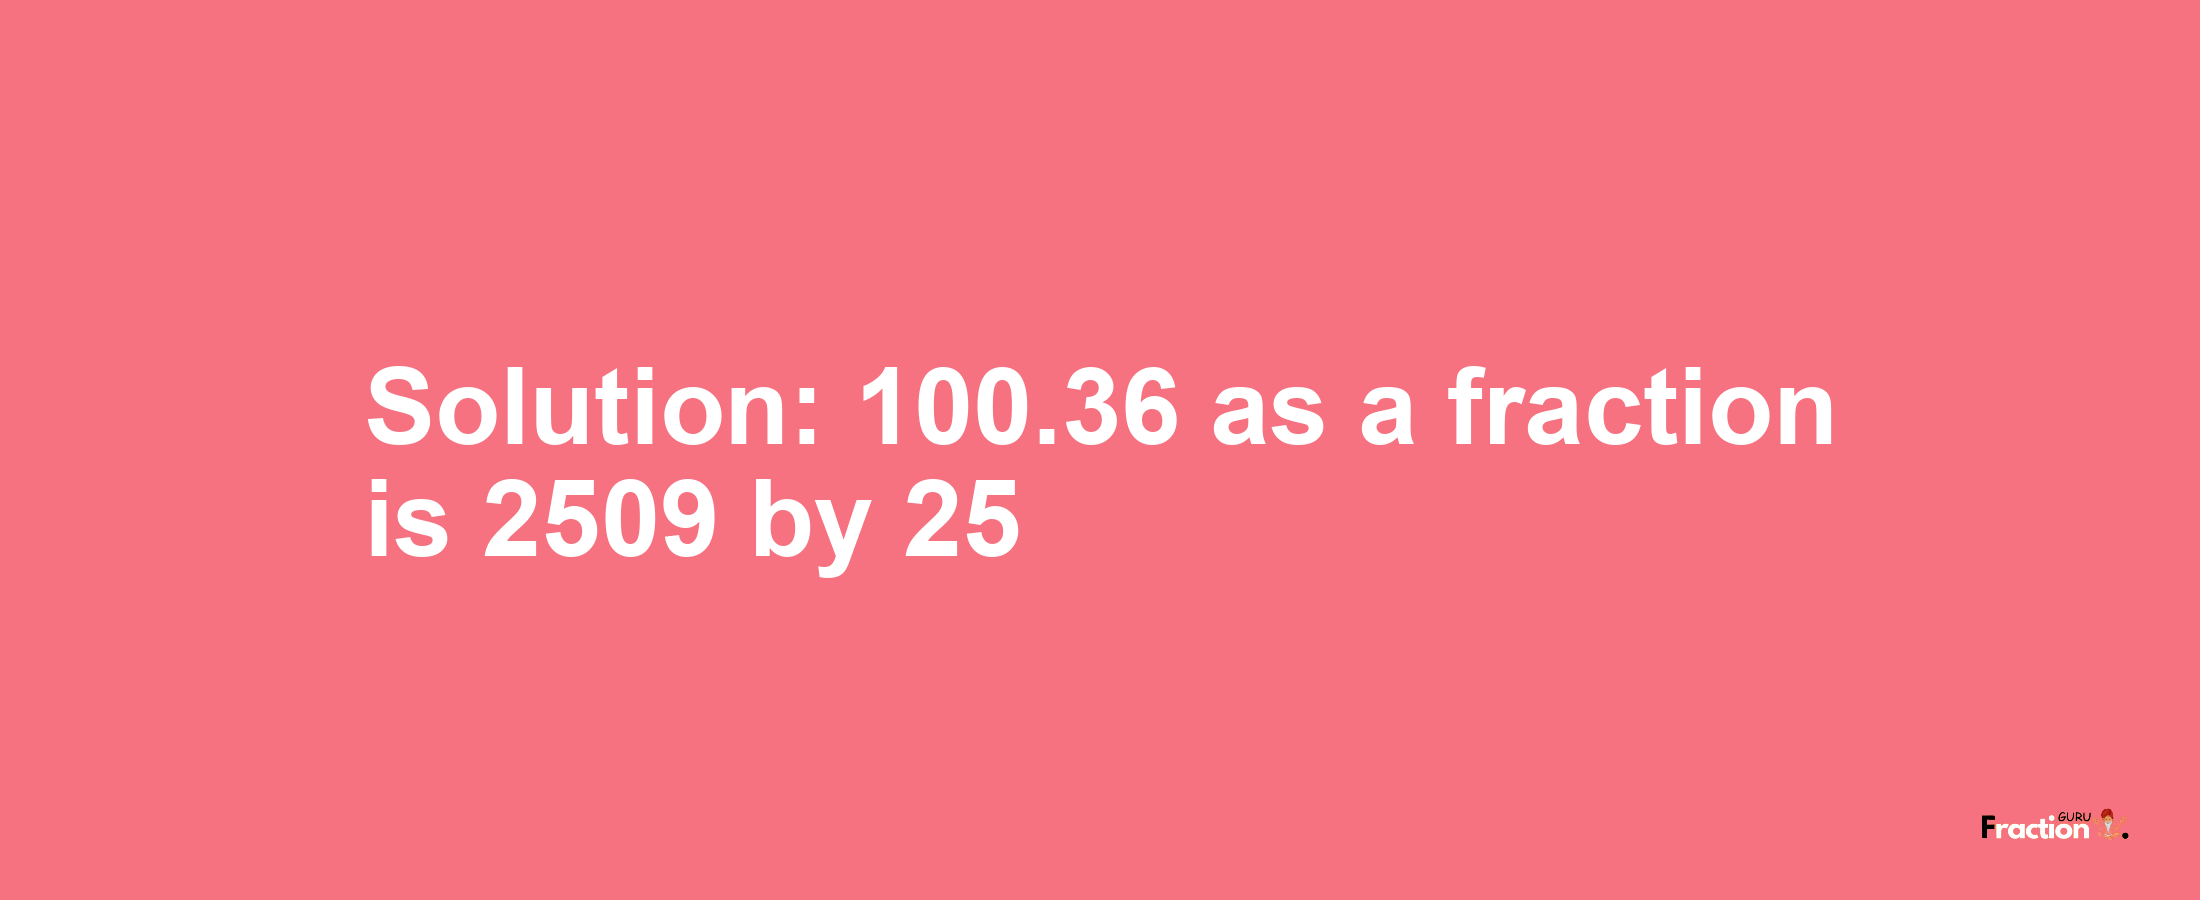 Solution:100.36 as a fraction is 2509/25